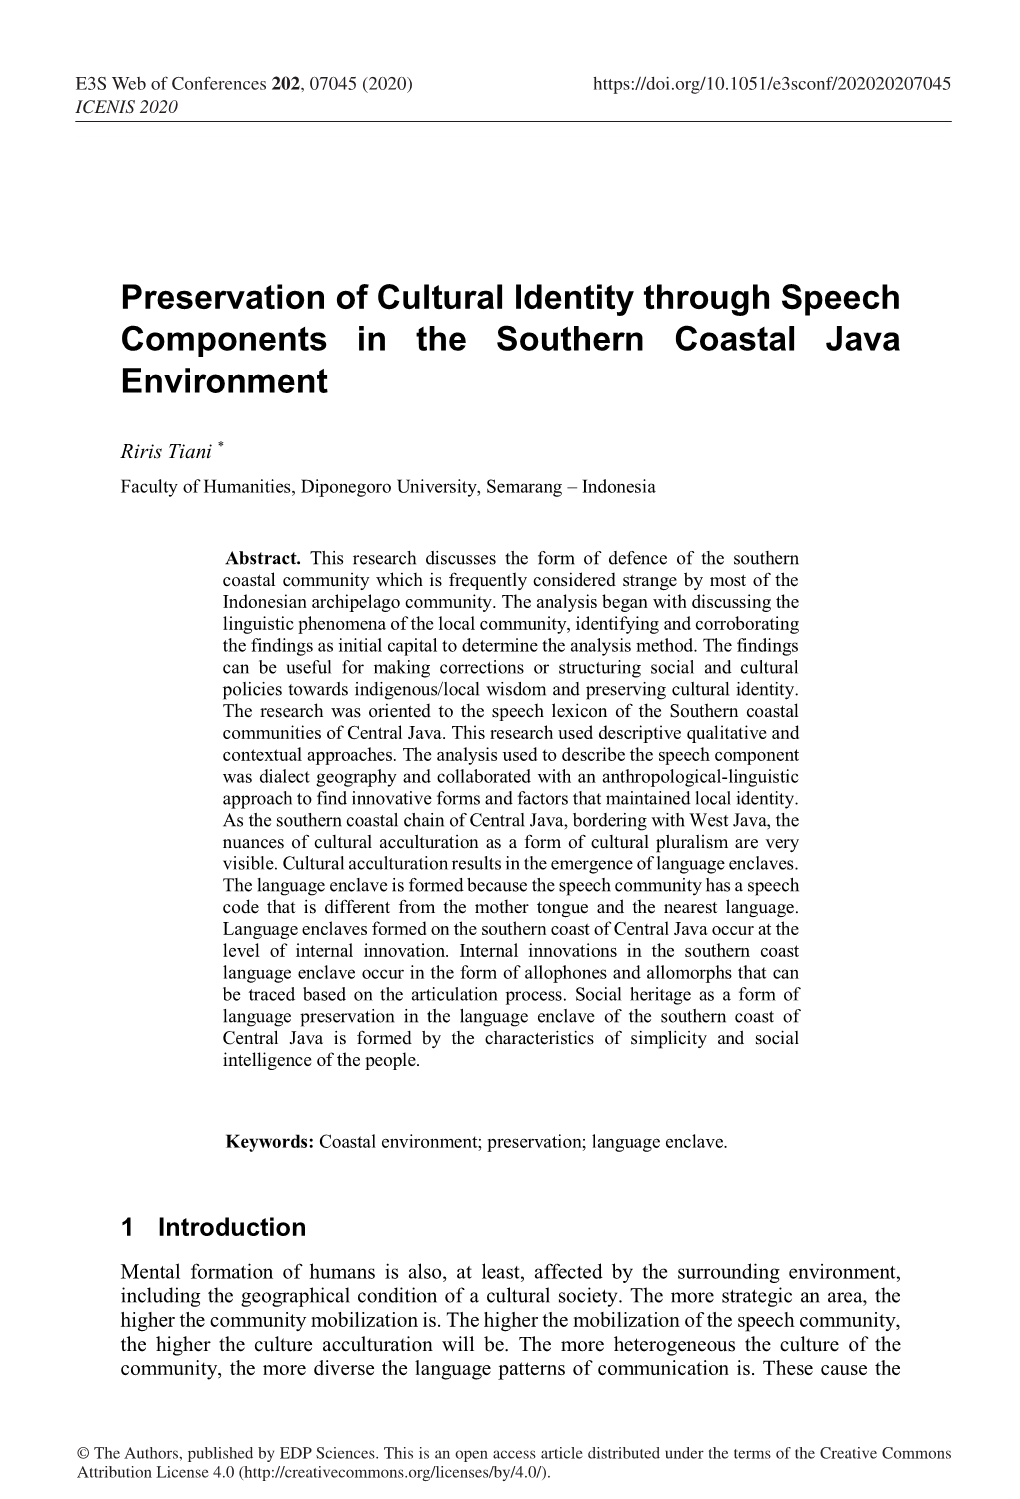 Preservation of Cultural Identity Through Speech Components in the Southern Coastal Java Environment